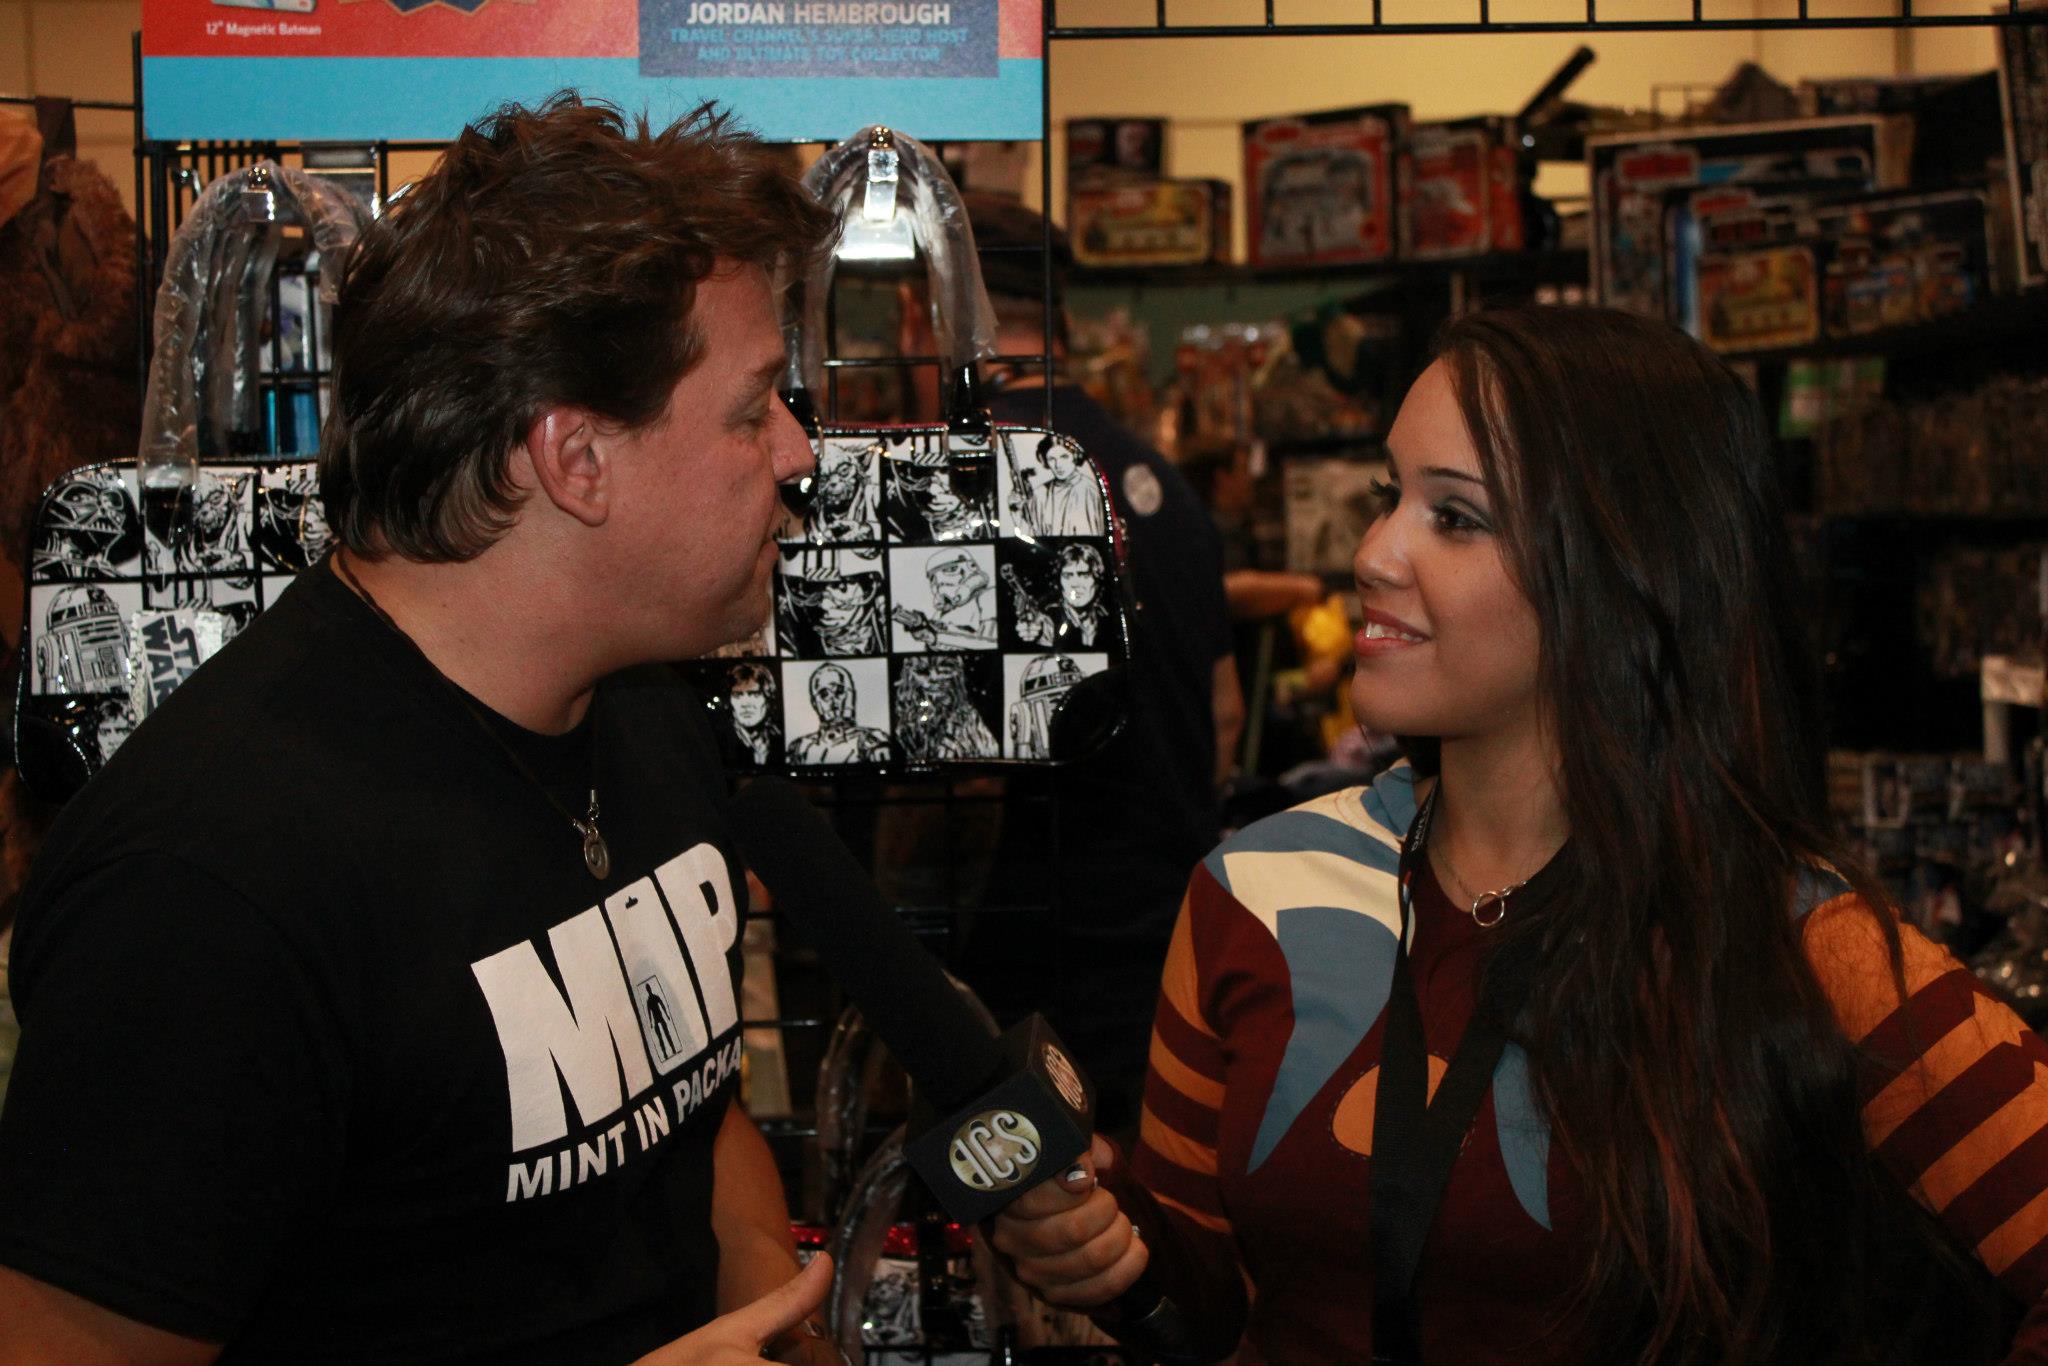 On location with Indie Cinema Showcase interviewing Travel Channel's Toy Hunter Jordan Hembrough at StarWars Celebration 6